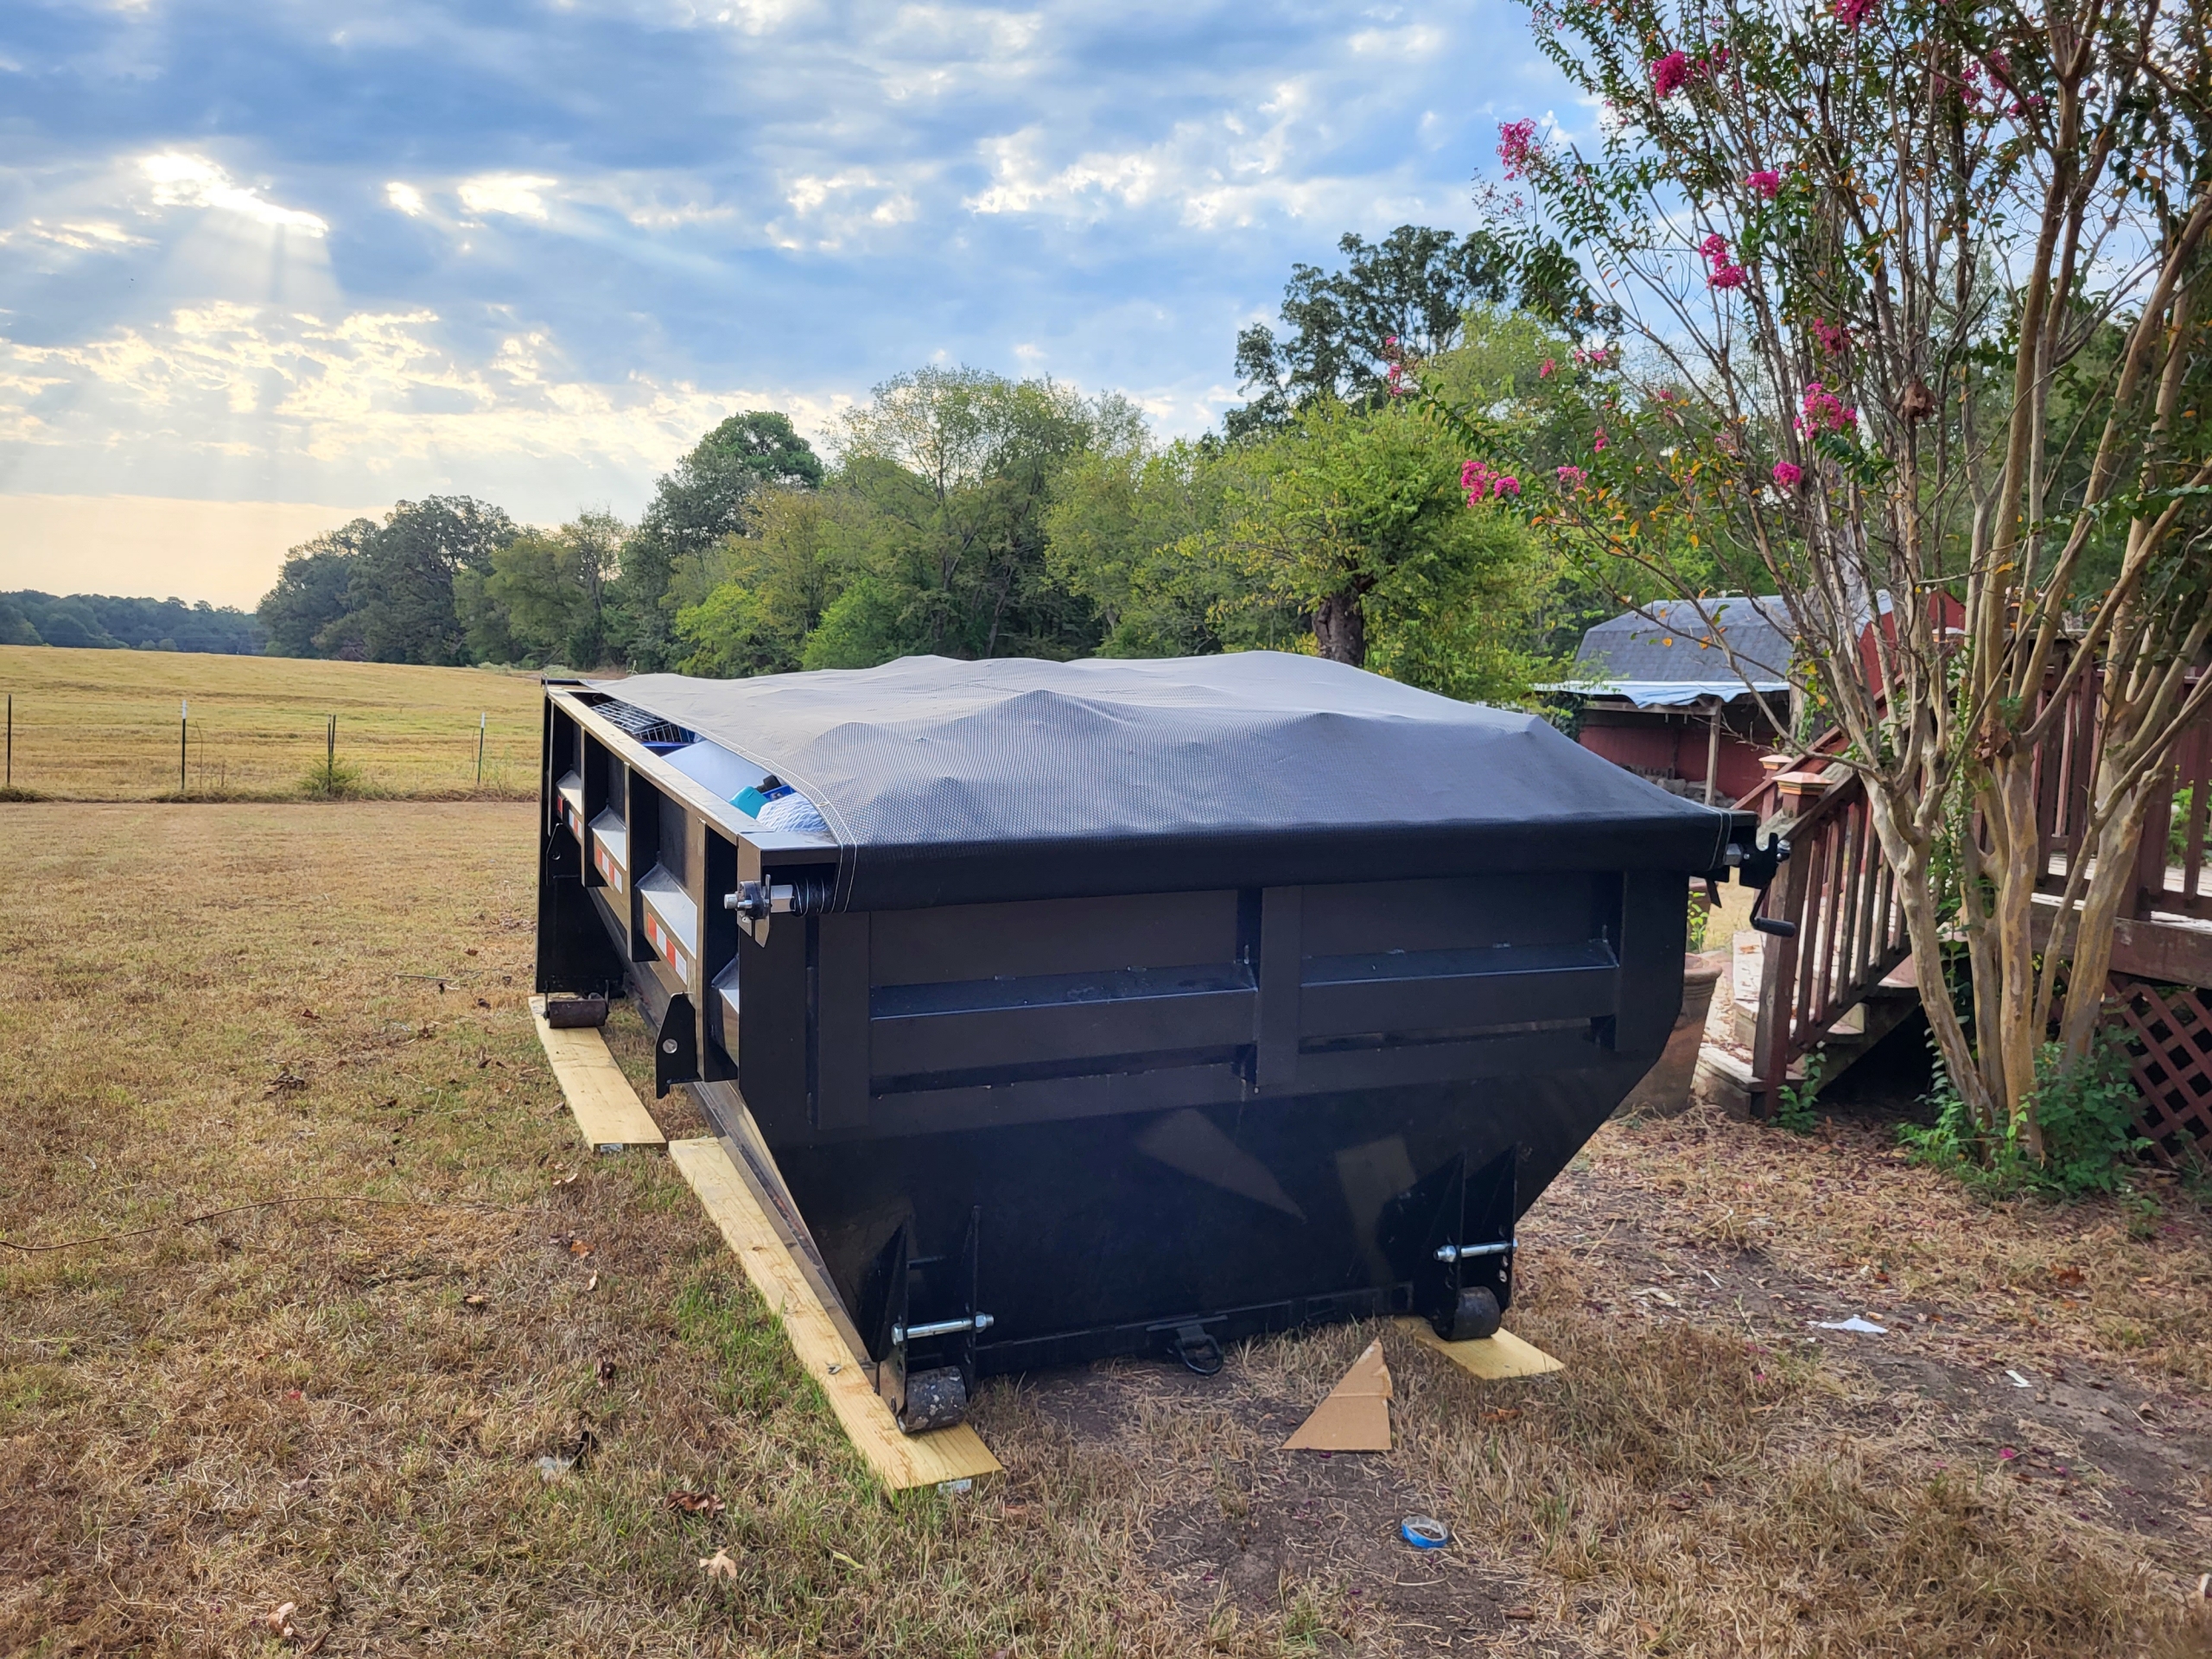 dumpster rental services in North East Texas